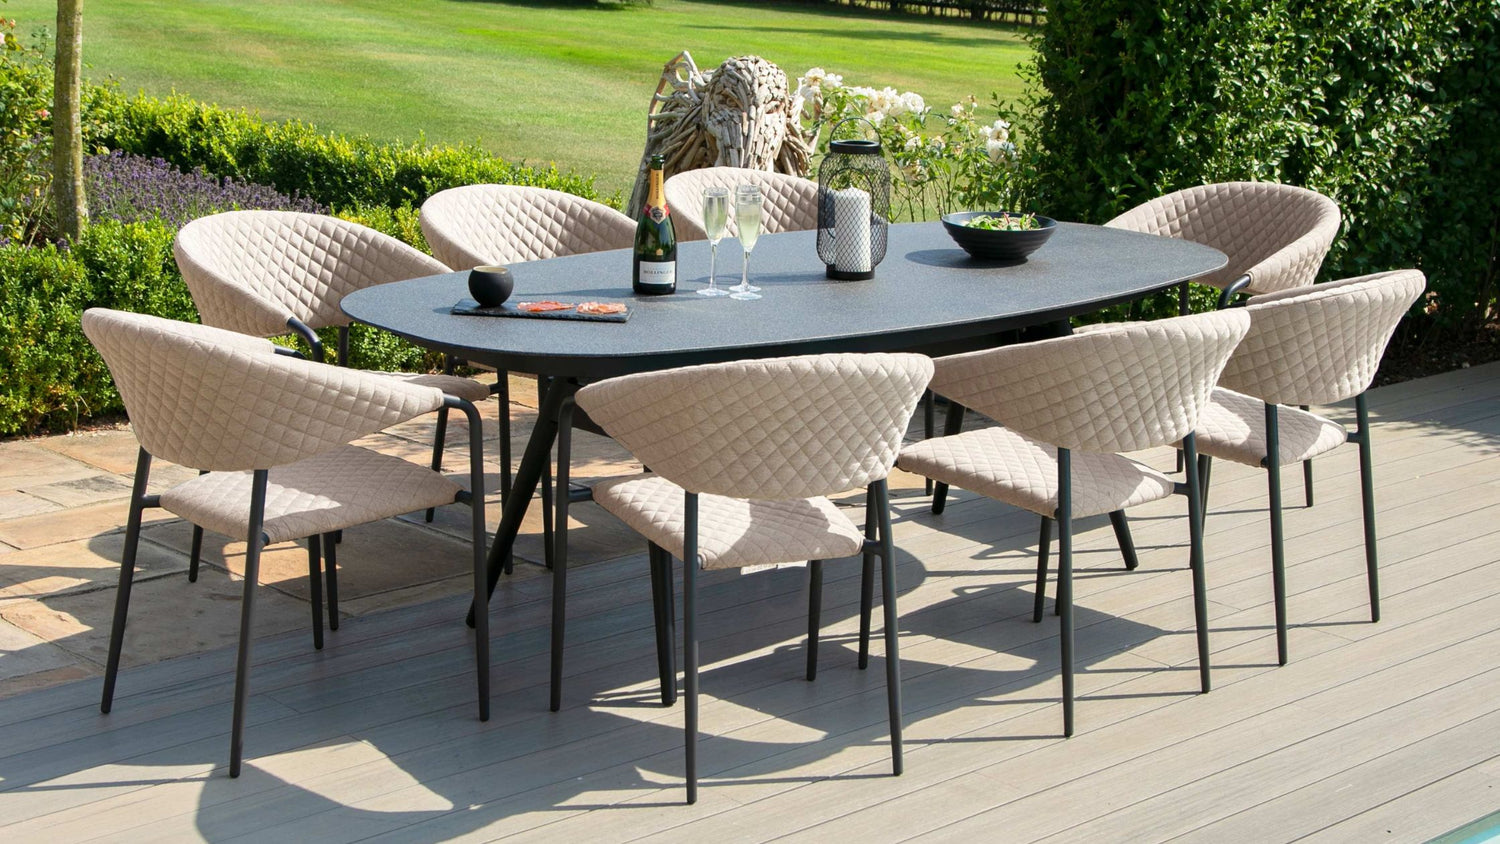 Our Top 10 Outdoor Fabric Sets